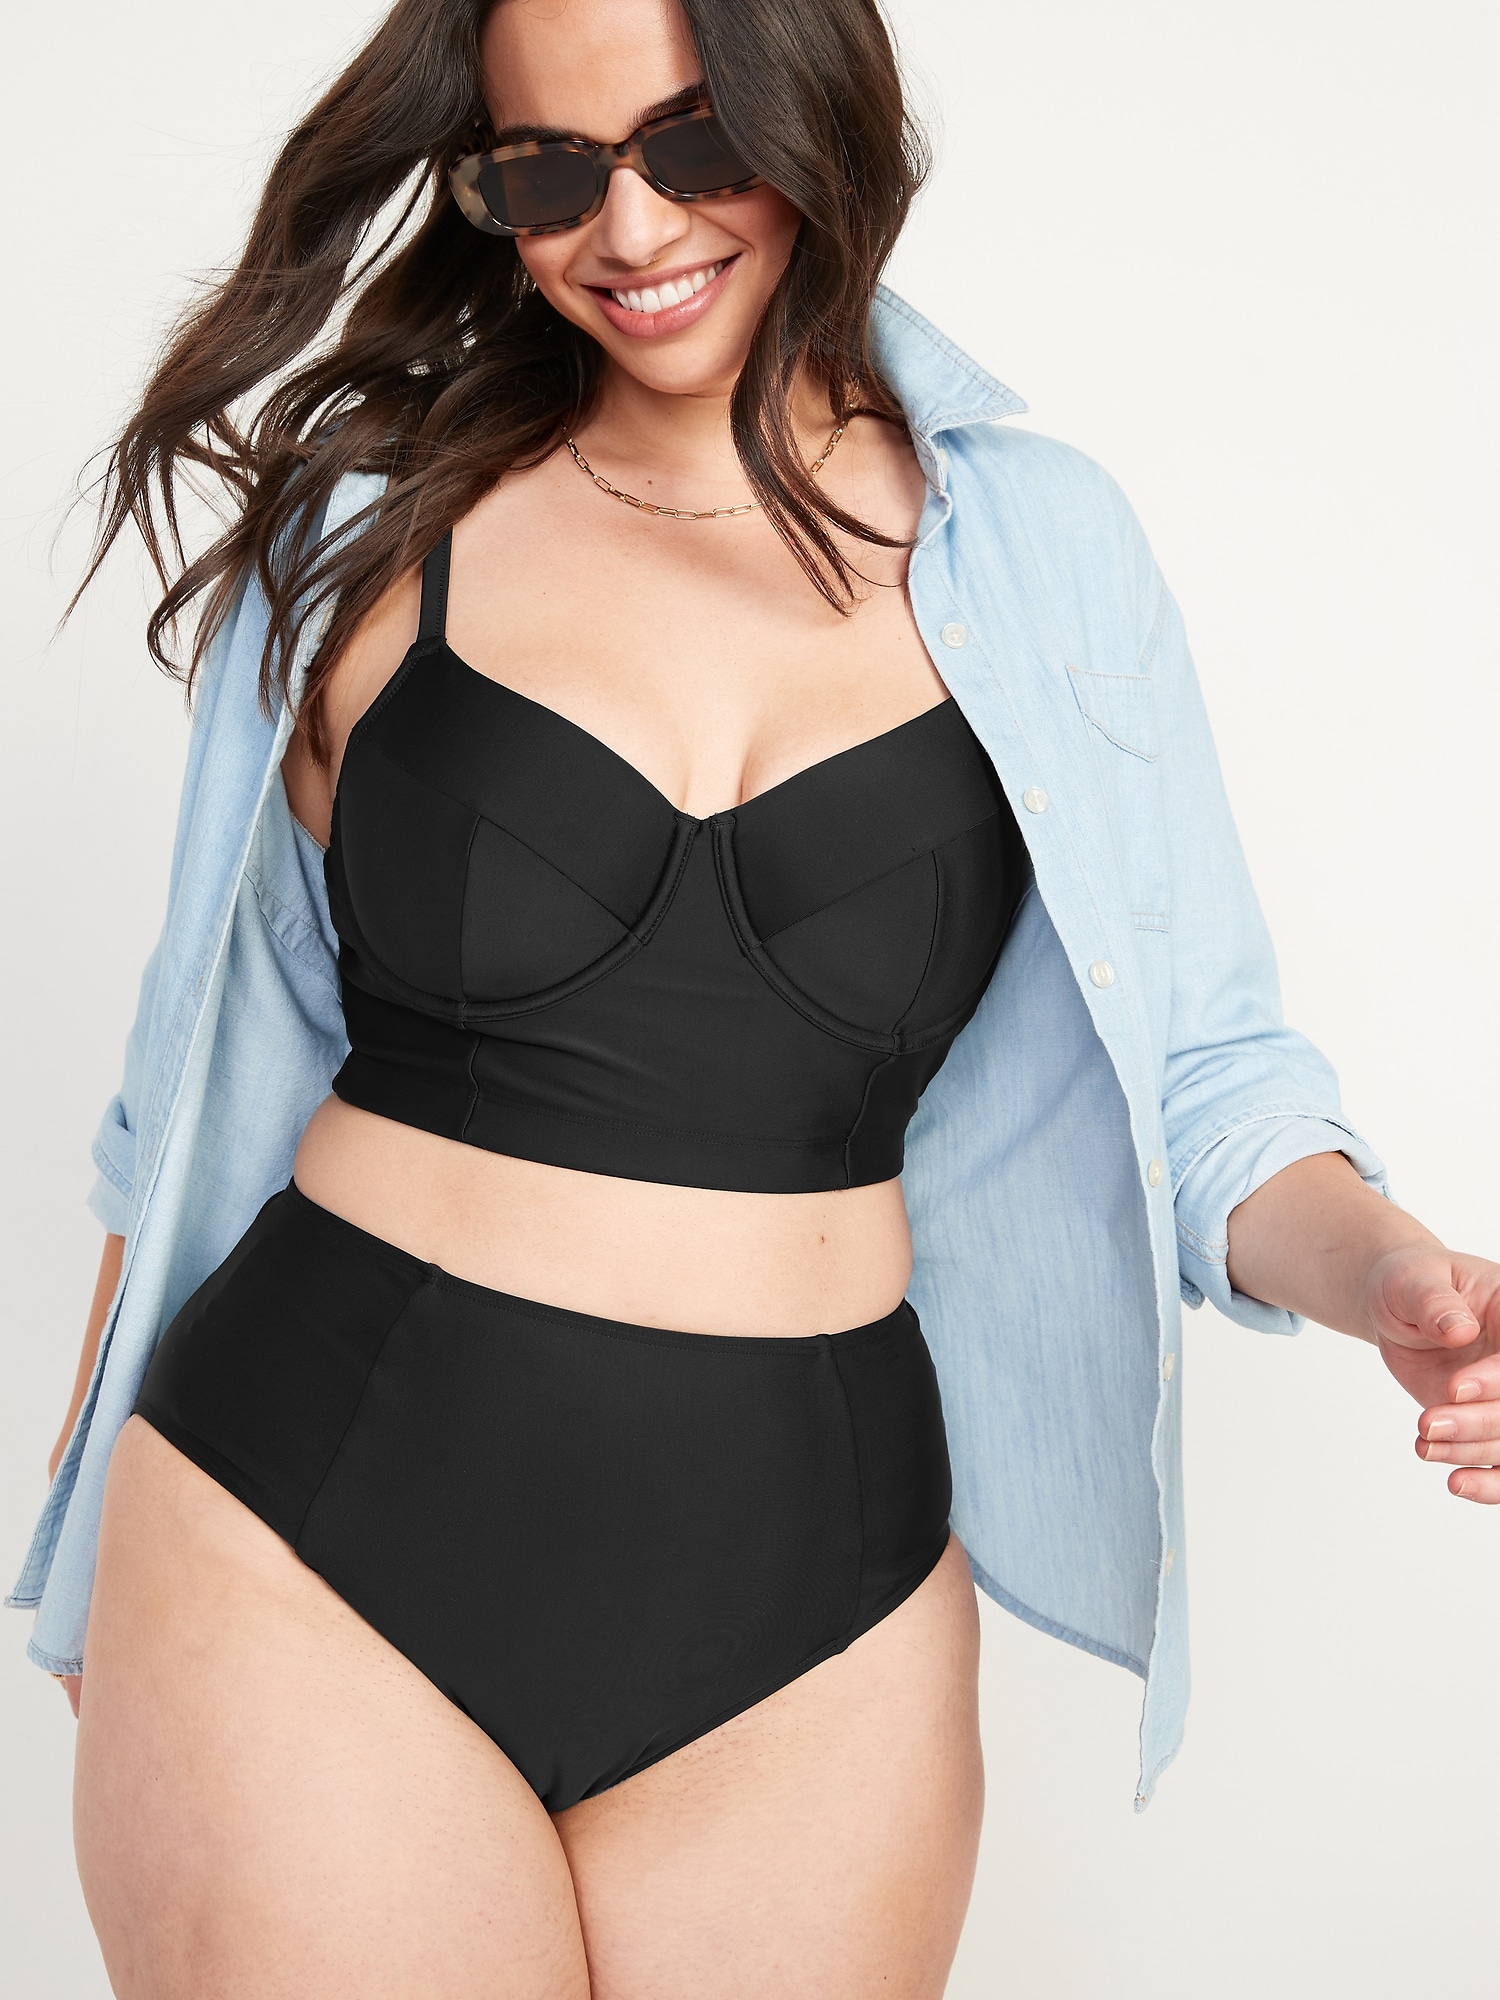 I'm a size 16 and did an Old Navy bikini haul – the first set I